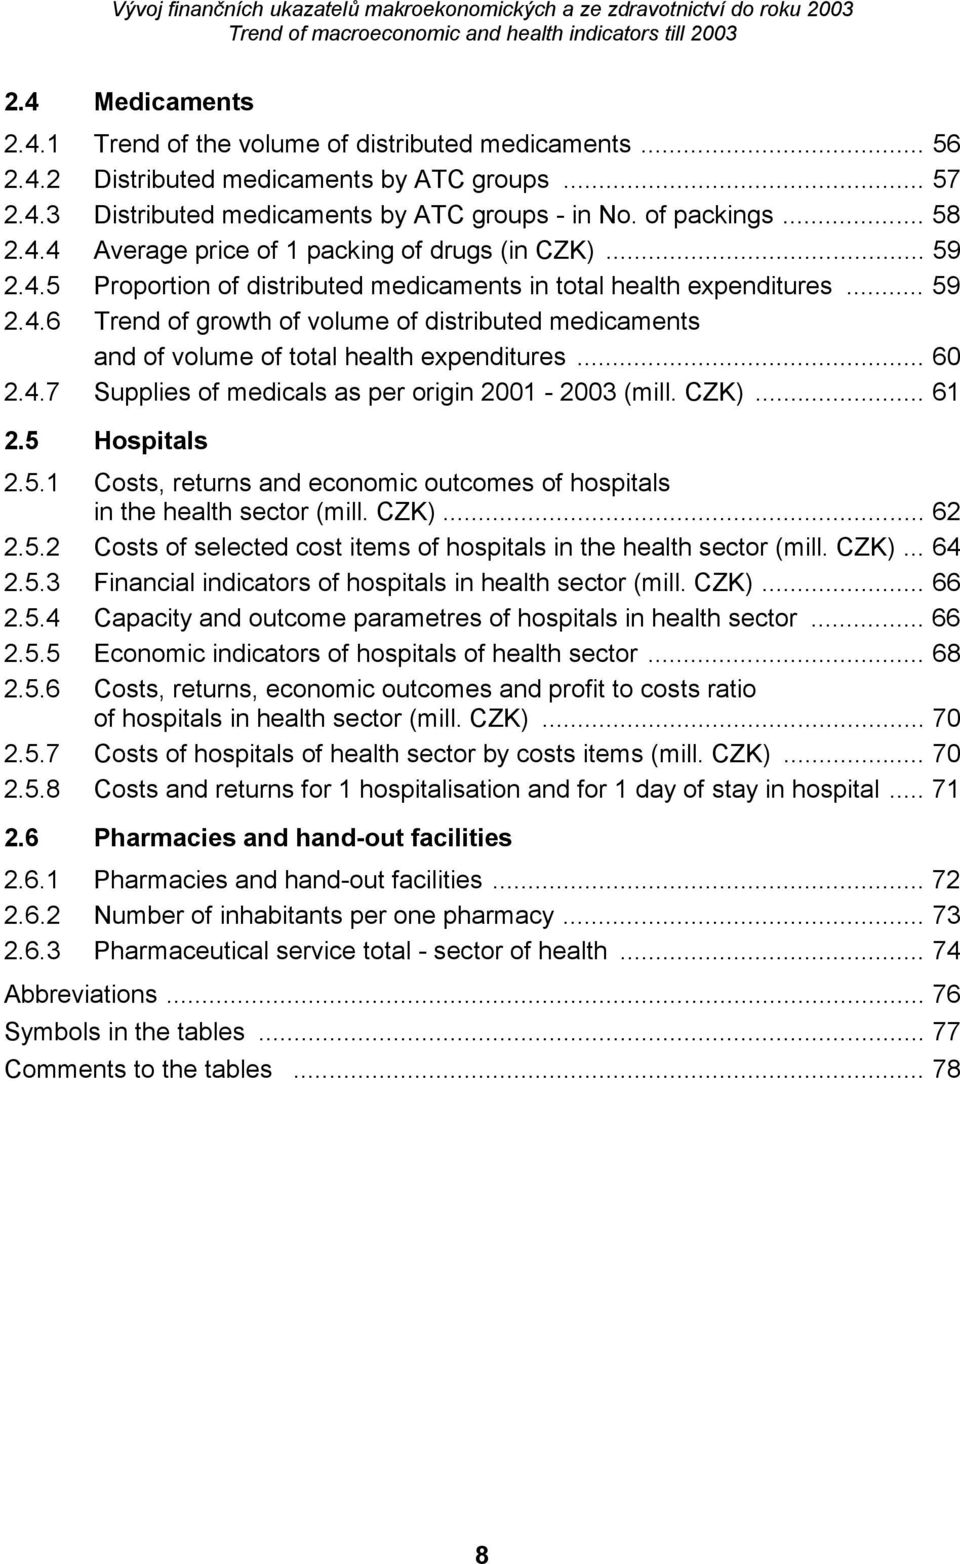 CZK)... 61 2.5 Hospitals 2.5.1 Costs, returns and economic outcomes of hospitals in the health sector (mill. CZK)... 62 2.5.2 Costs of selected cost items of hospitals in the health sector (mill.